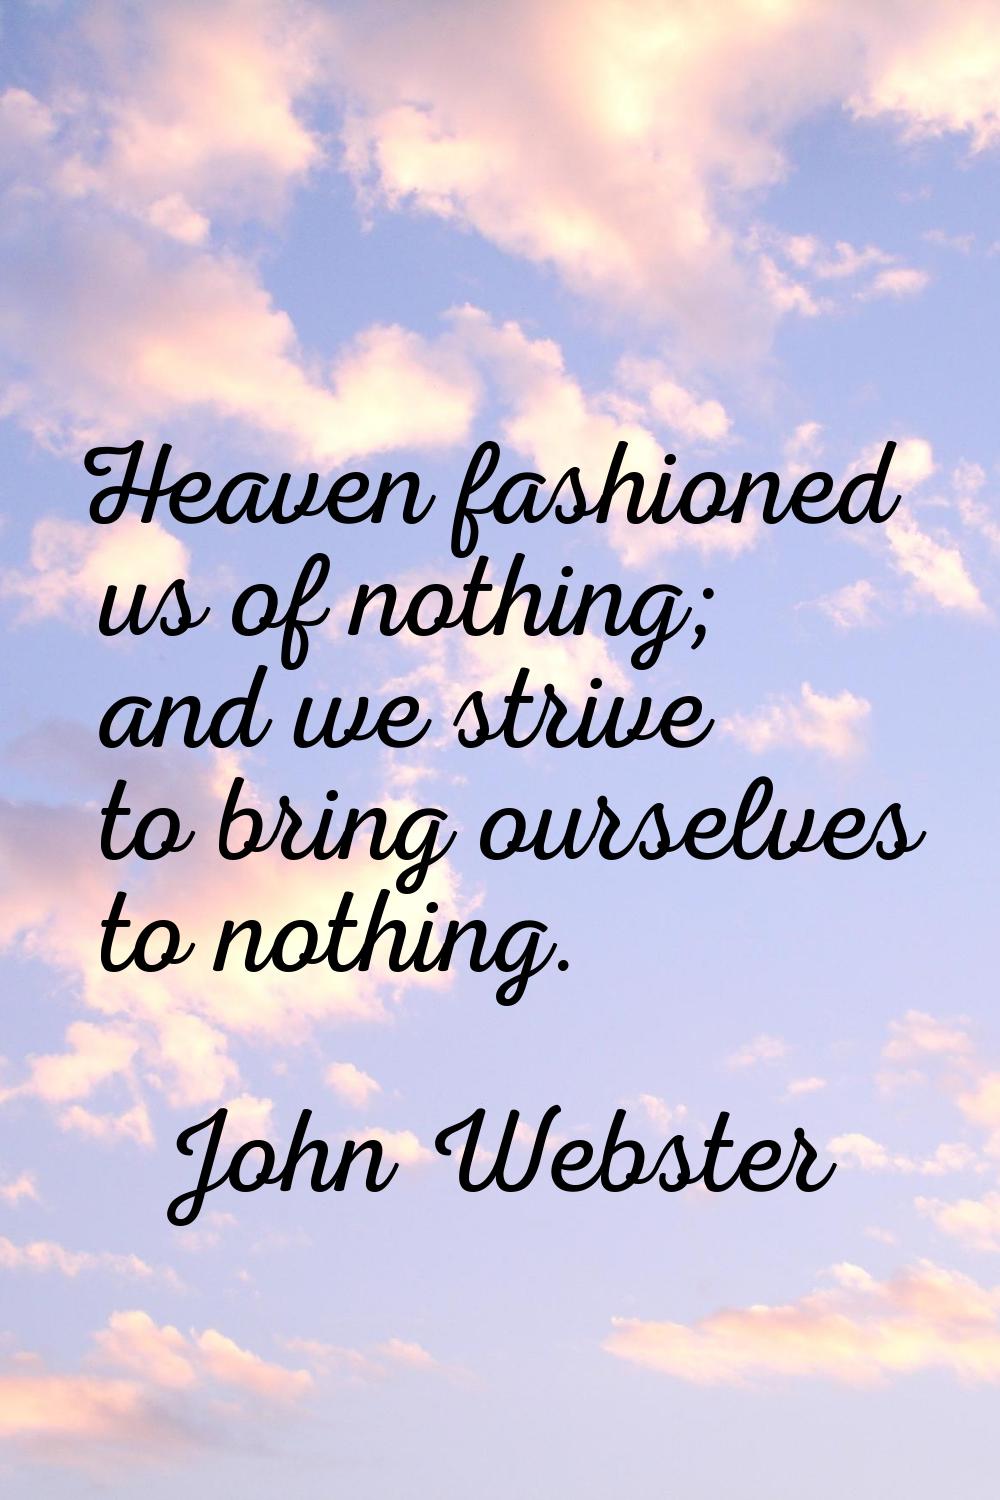 Heaven fashioned us of nothing; and we strive to bring ourselves to nothing.